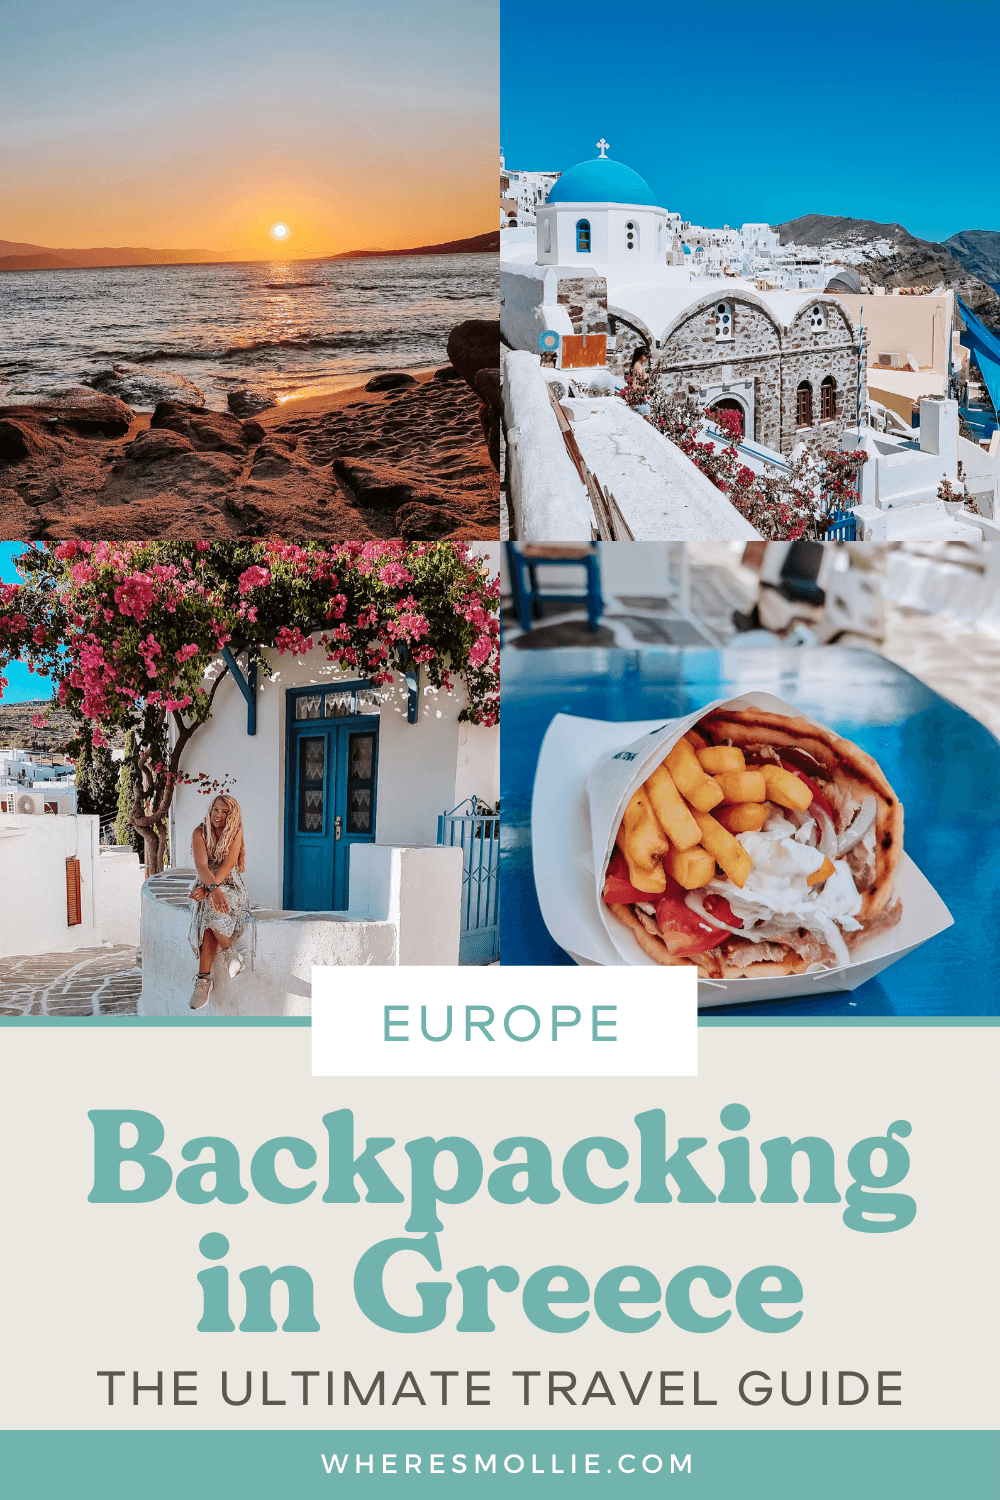 A guide to backpacking the Cyclades Islands, Greece